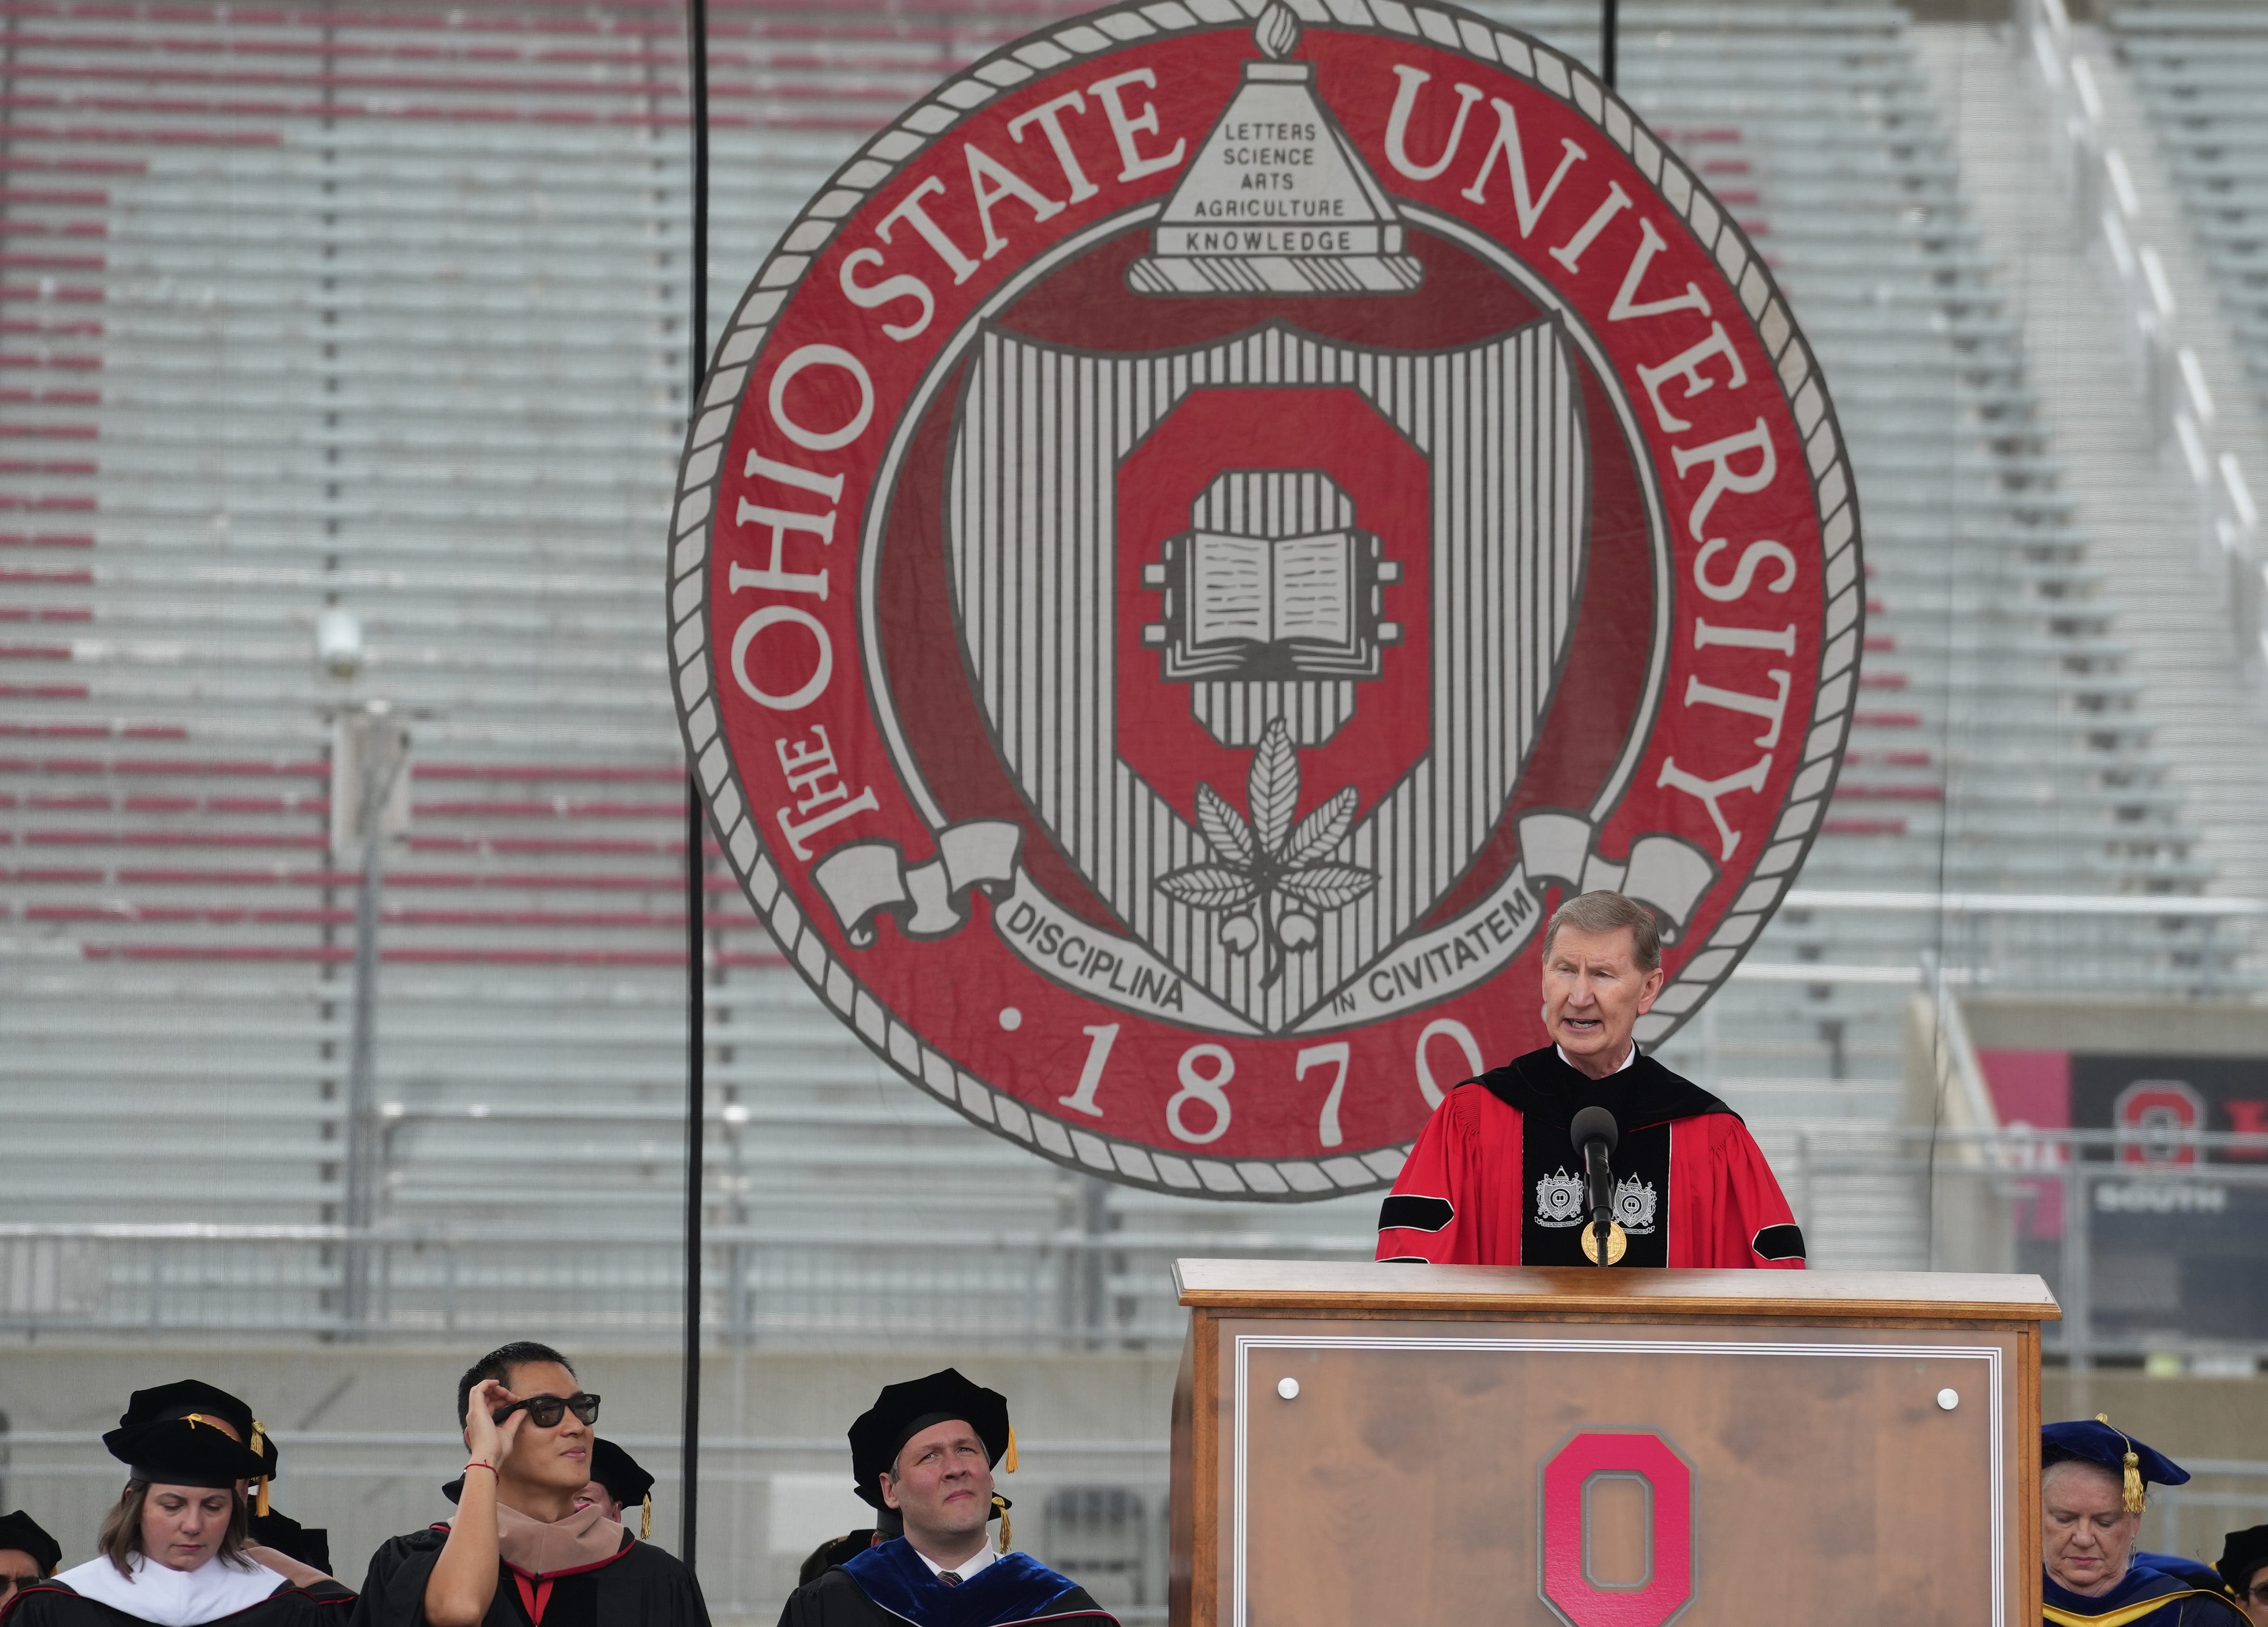 Ohio State president responds to 'non-traditional' commencement speech, Bitcoin connections